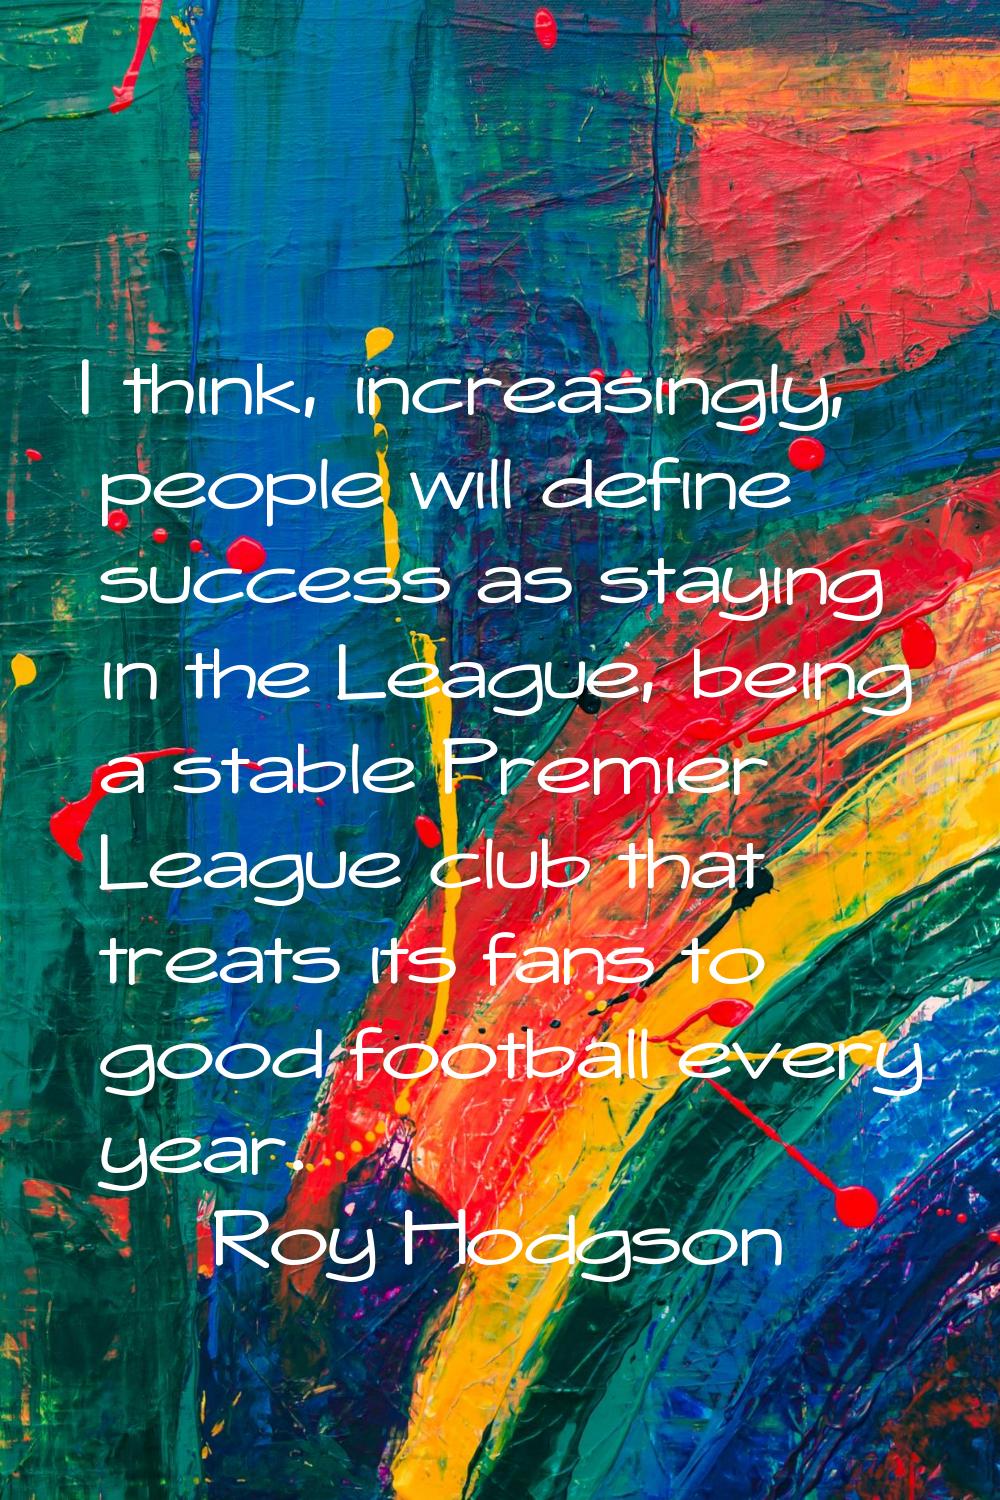 I think, increasingly, people will define success as staying in the League, being a stable Premier 